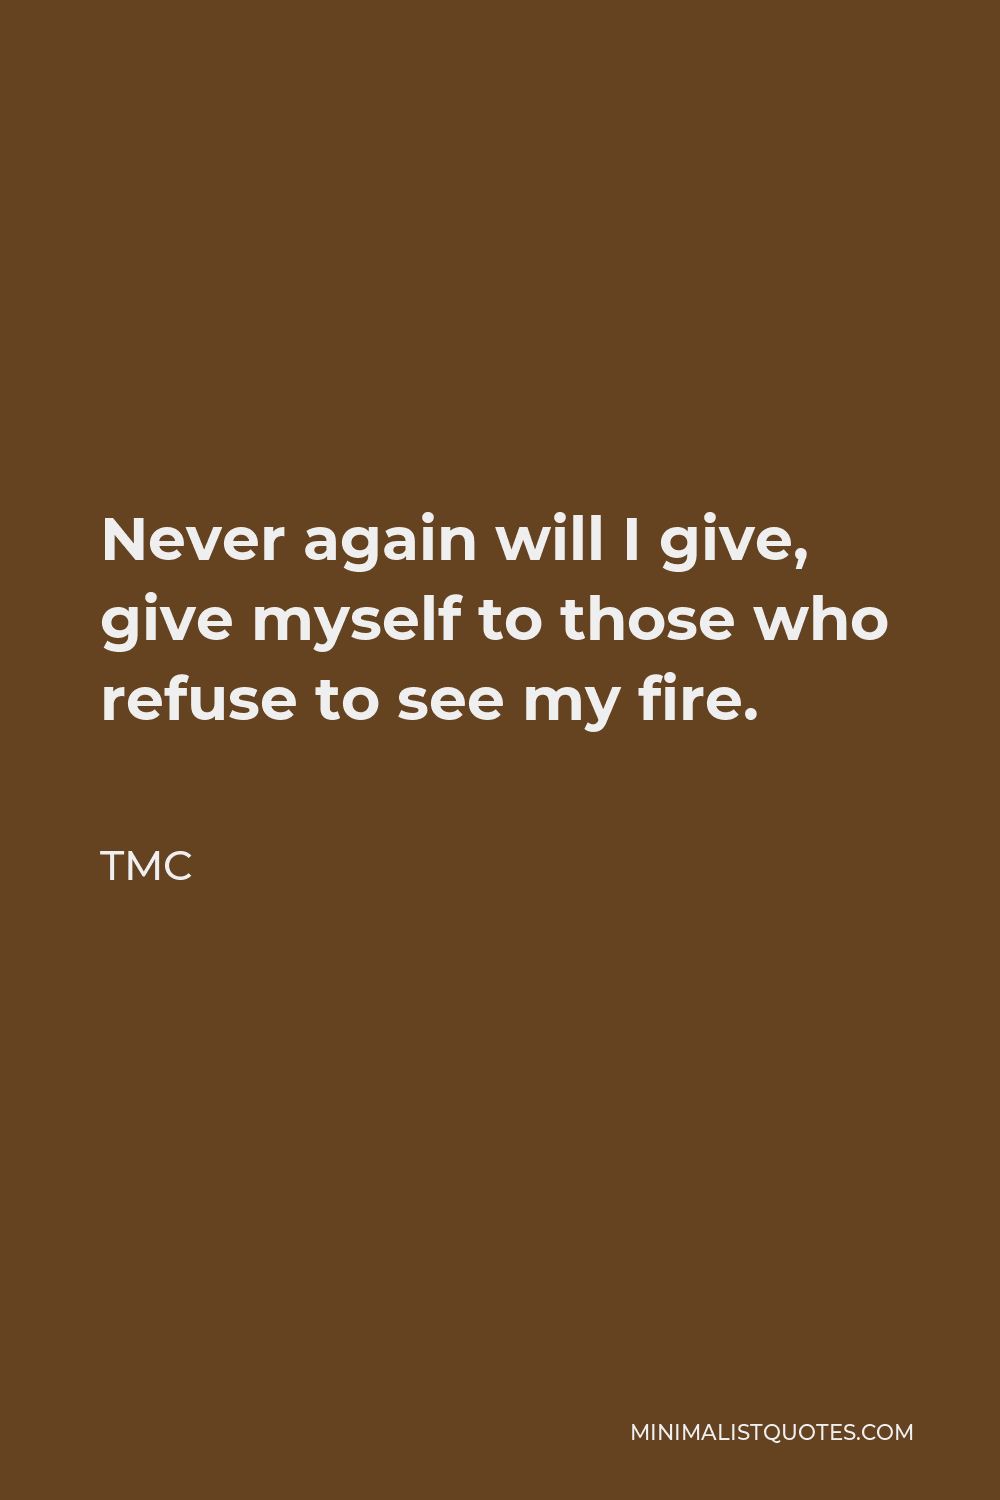 TMC Quote - Never again will I give, give myself to those who refuse to see my fire.